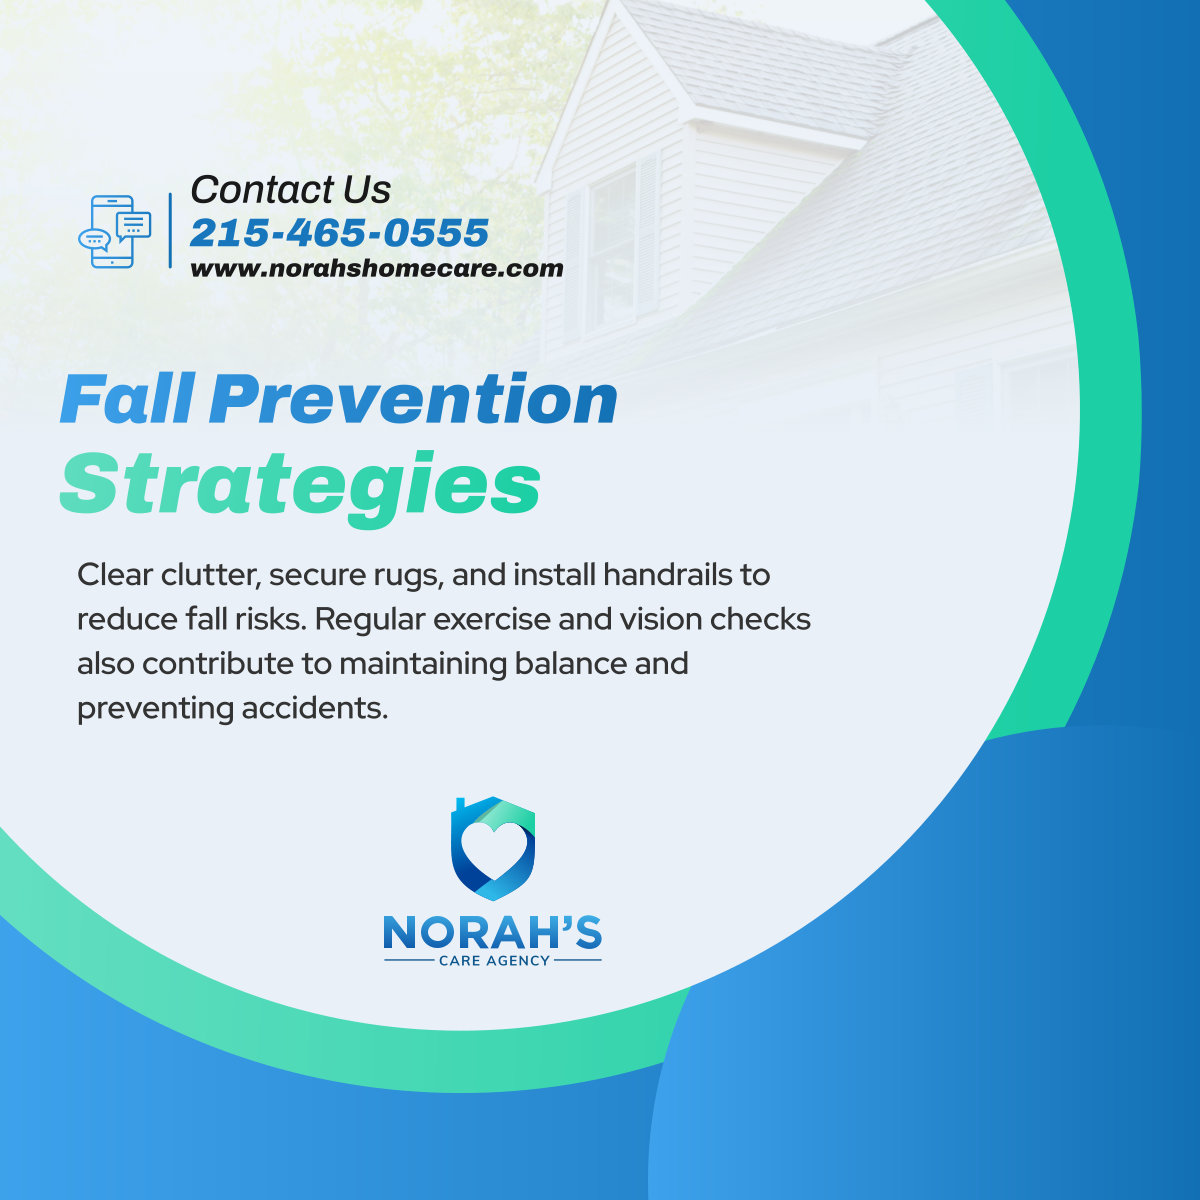 Falls can be a major concern for older adults. Implementing these strategies can help prevent accidents and promote safety at home. 

#PhiladelphiaPA #HomeCare #FallPrevention